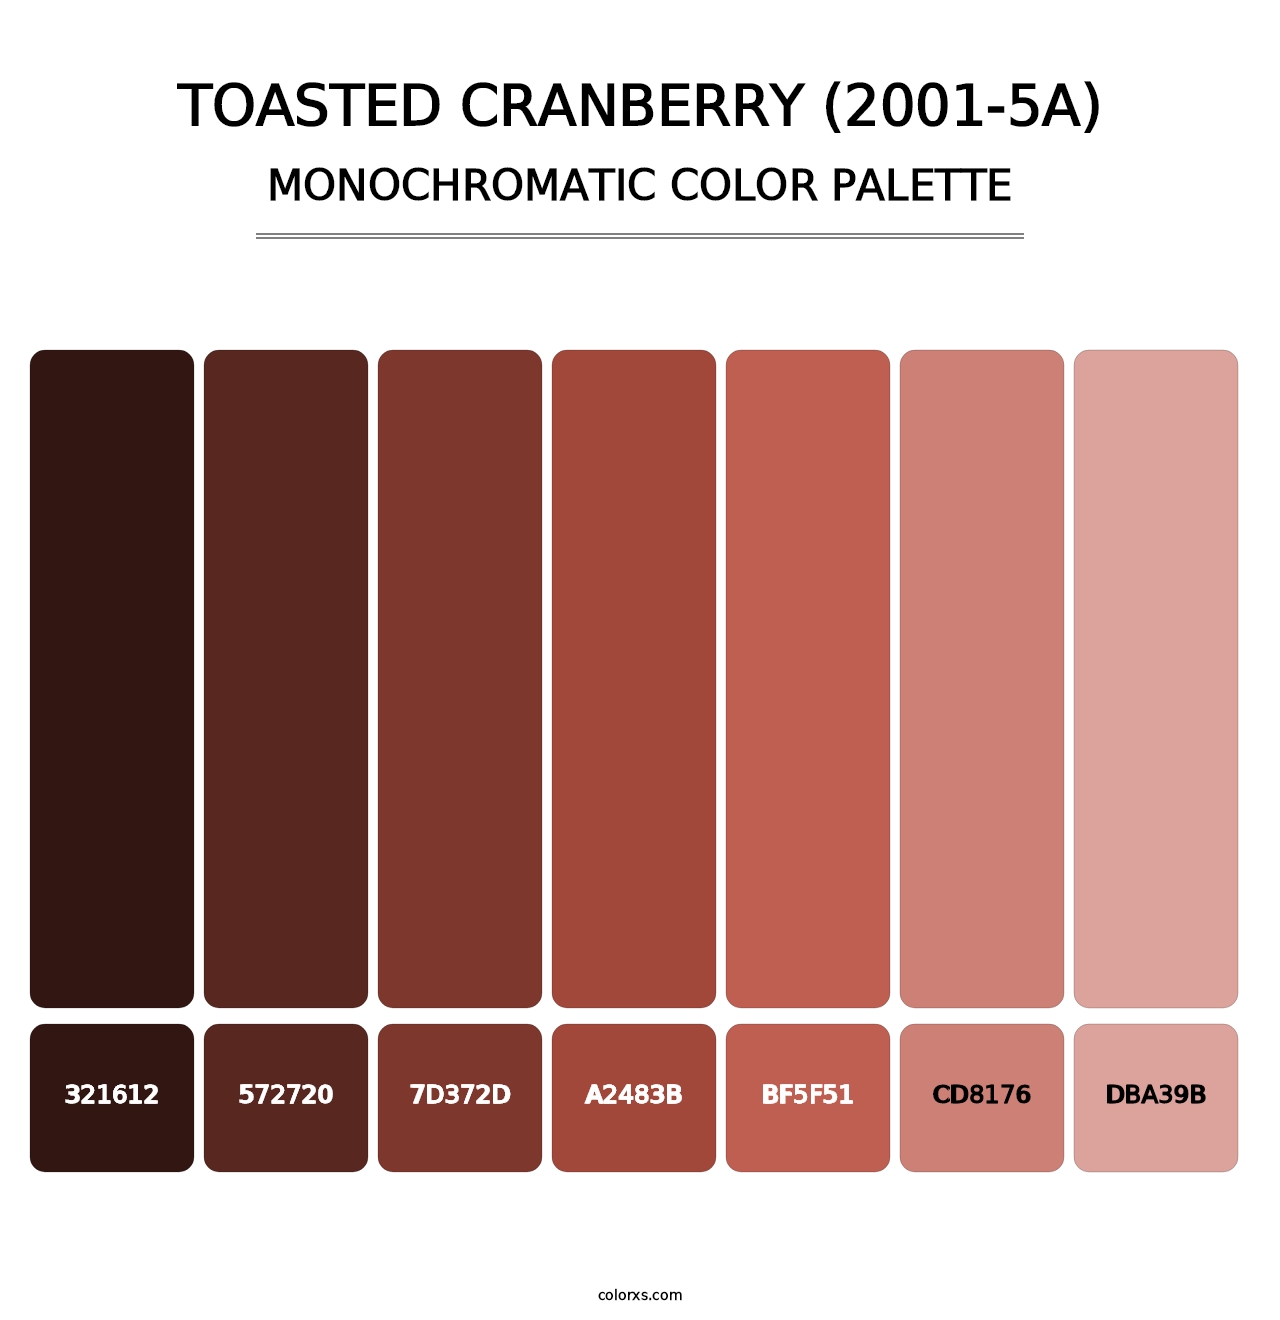 Toasted Cranberry (2001-5A) - Monochromatic Color Palette